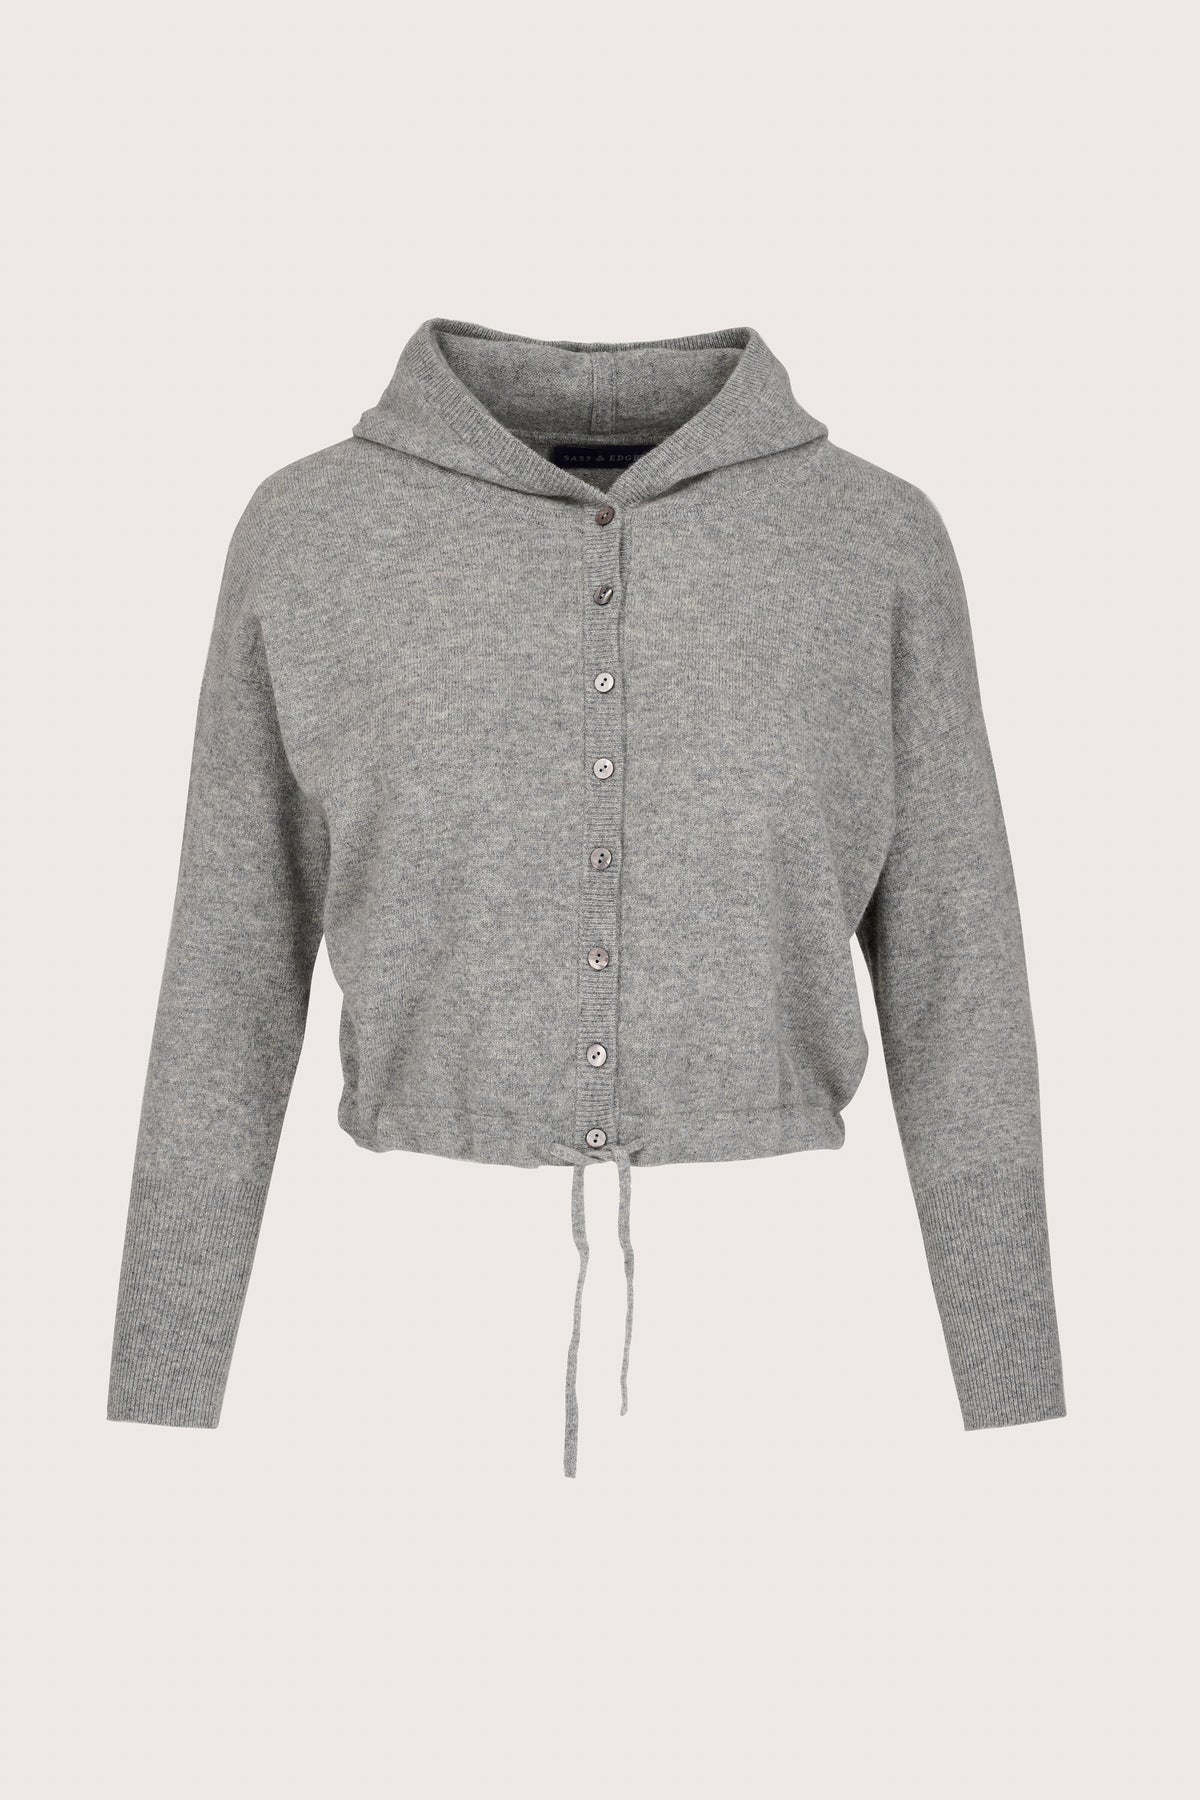 grey boxy and cropped button through hoodie top